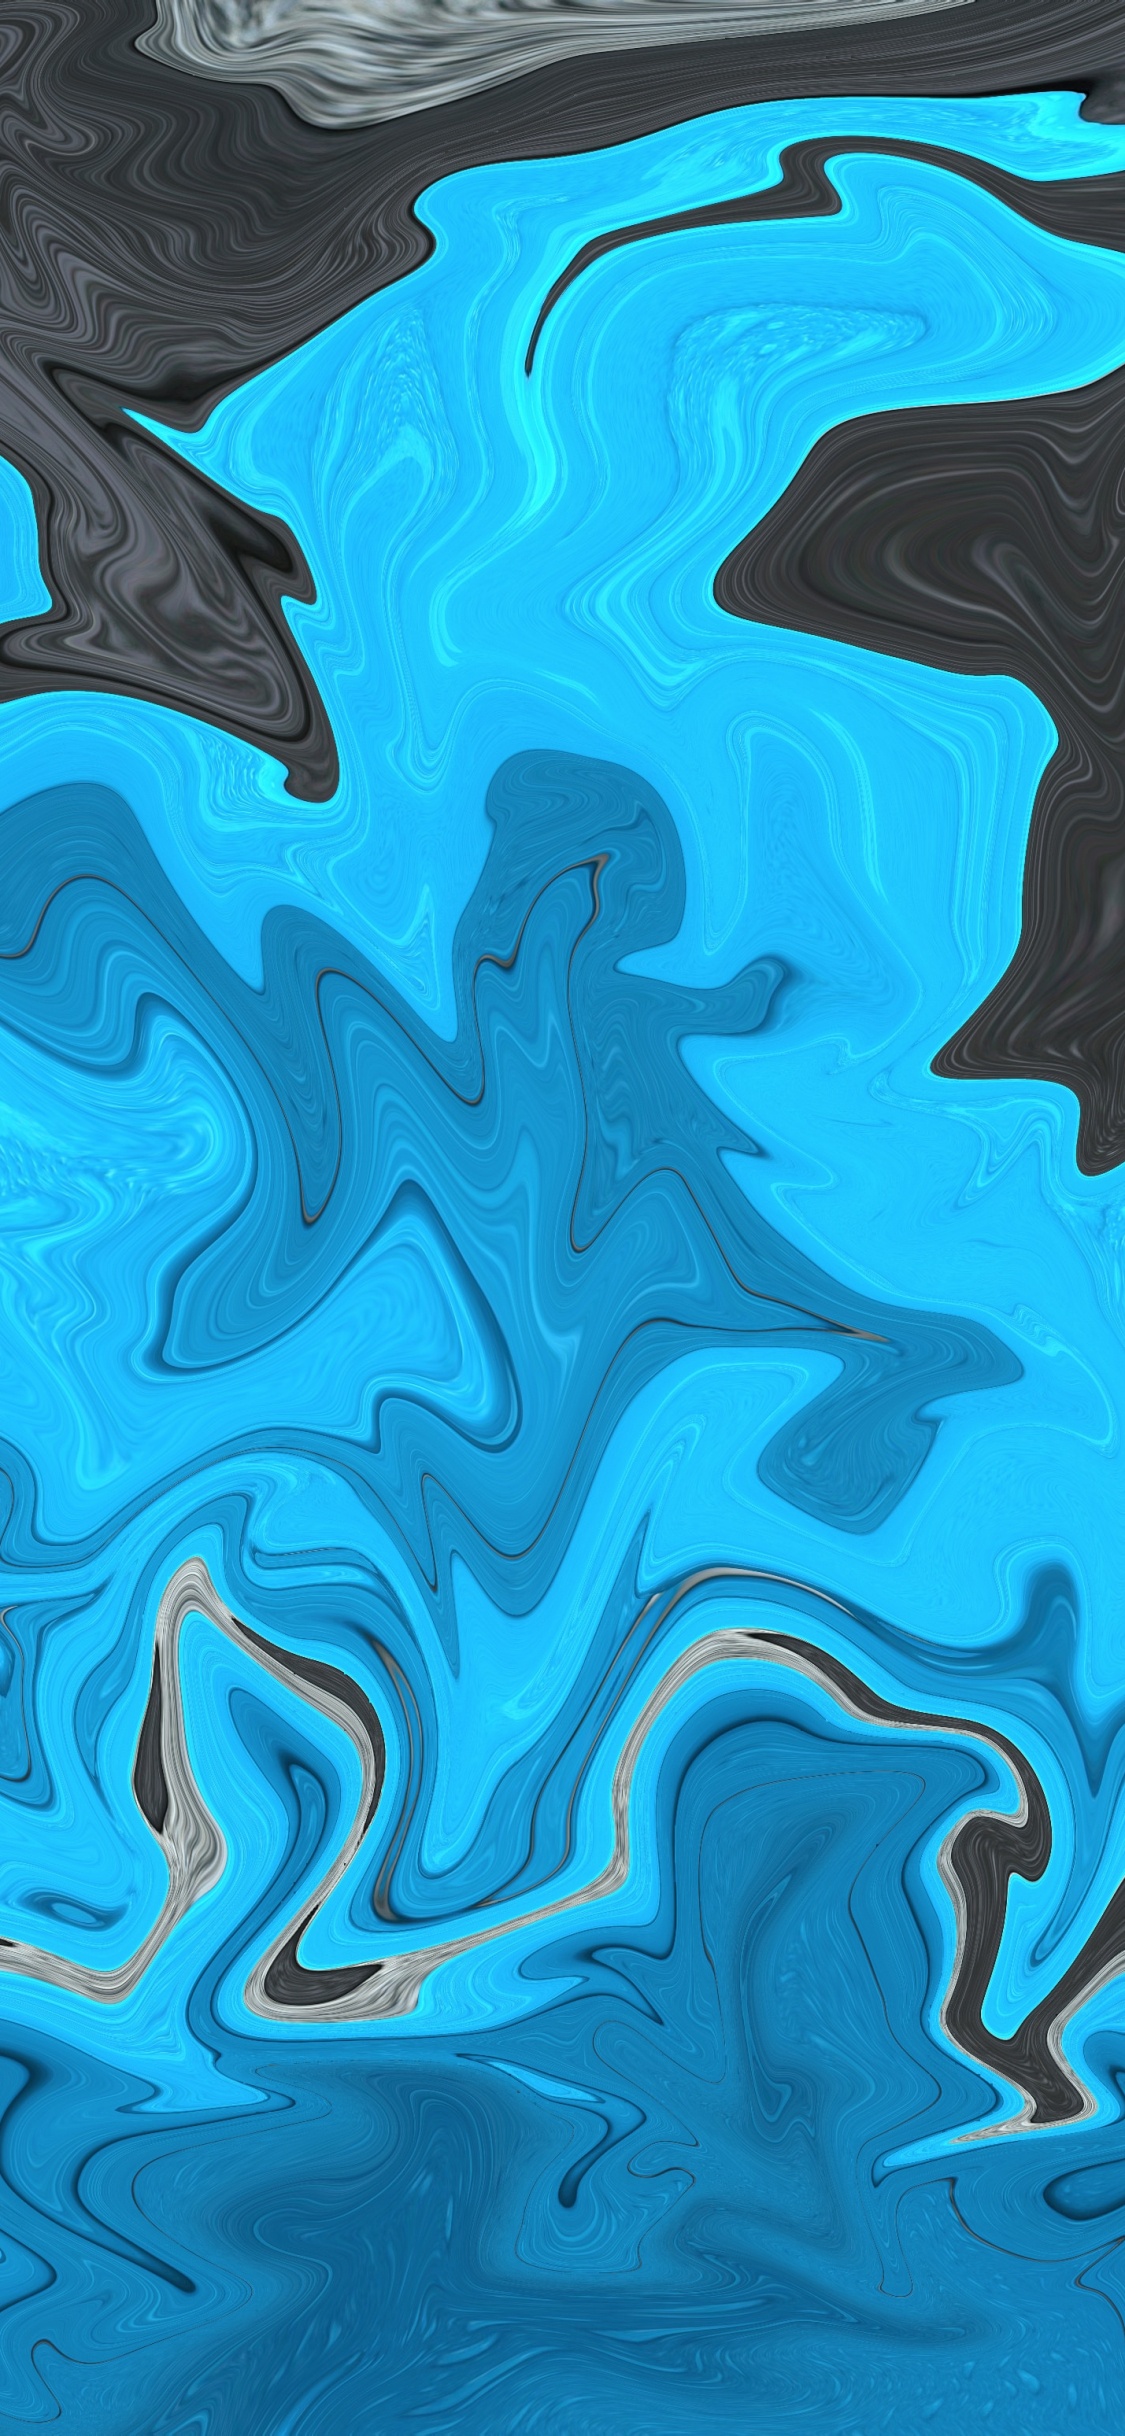 Blue and Black Abstract Painting. Wallpaper in 1125x2436 Resolution